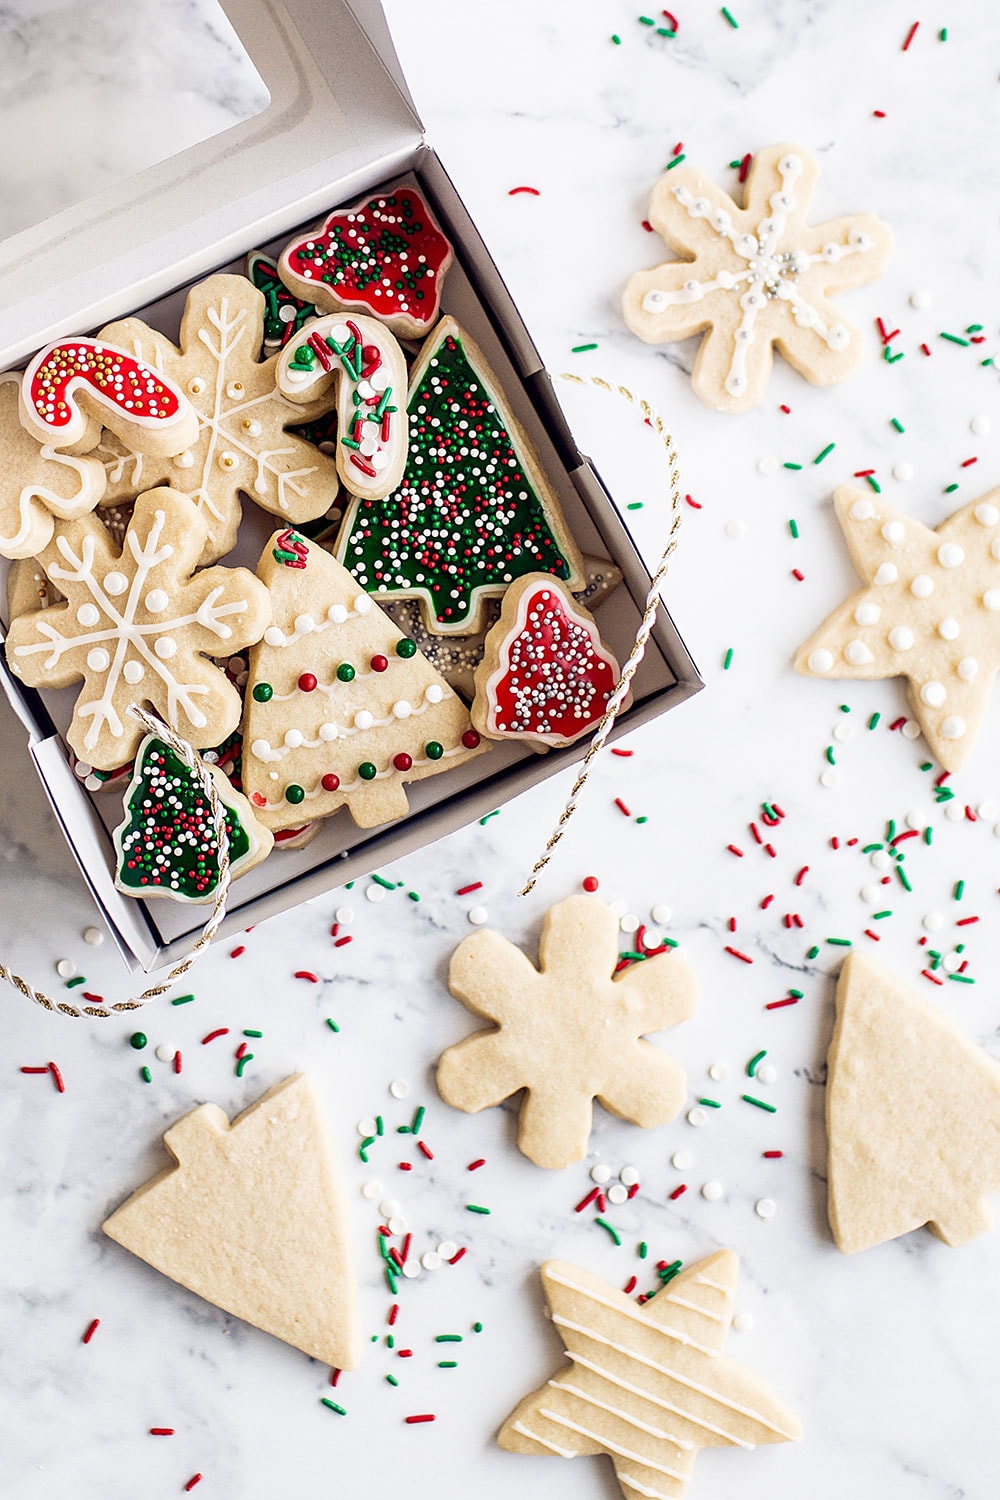 Christmas in July or anytime with my delicious, easy, adorable cut out sugar cookies - perfect for the kids, too!